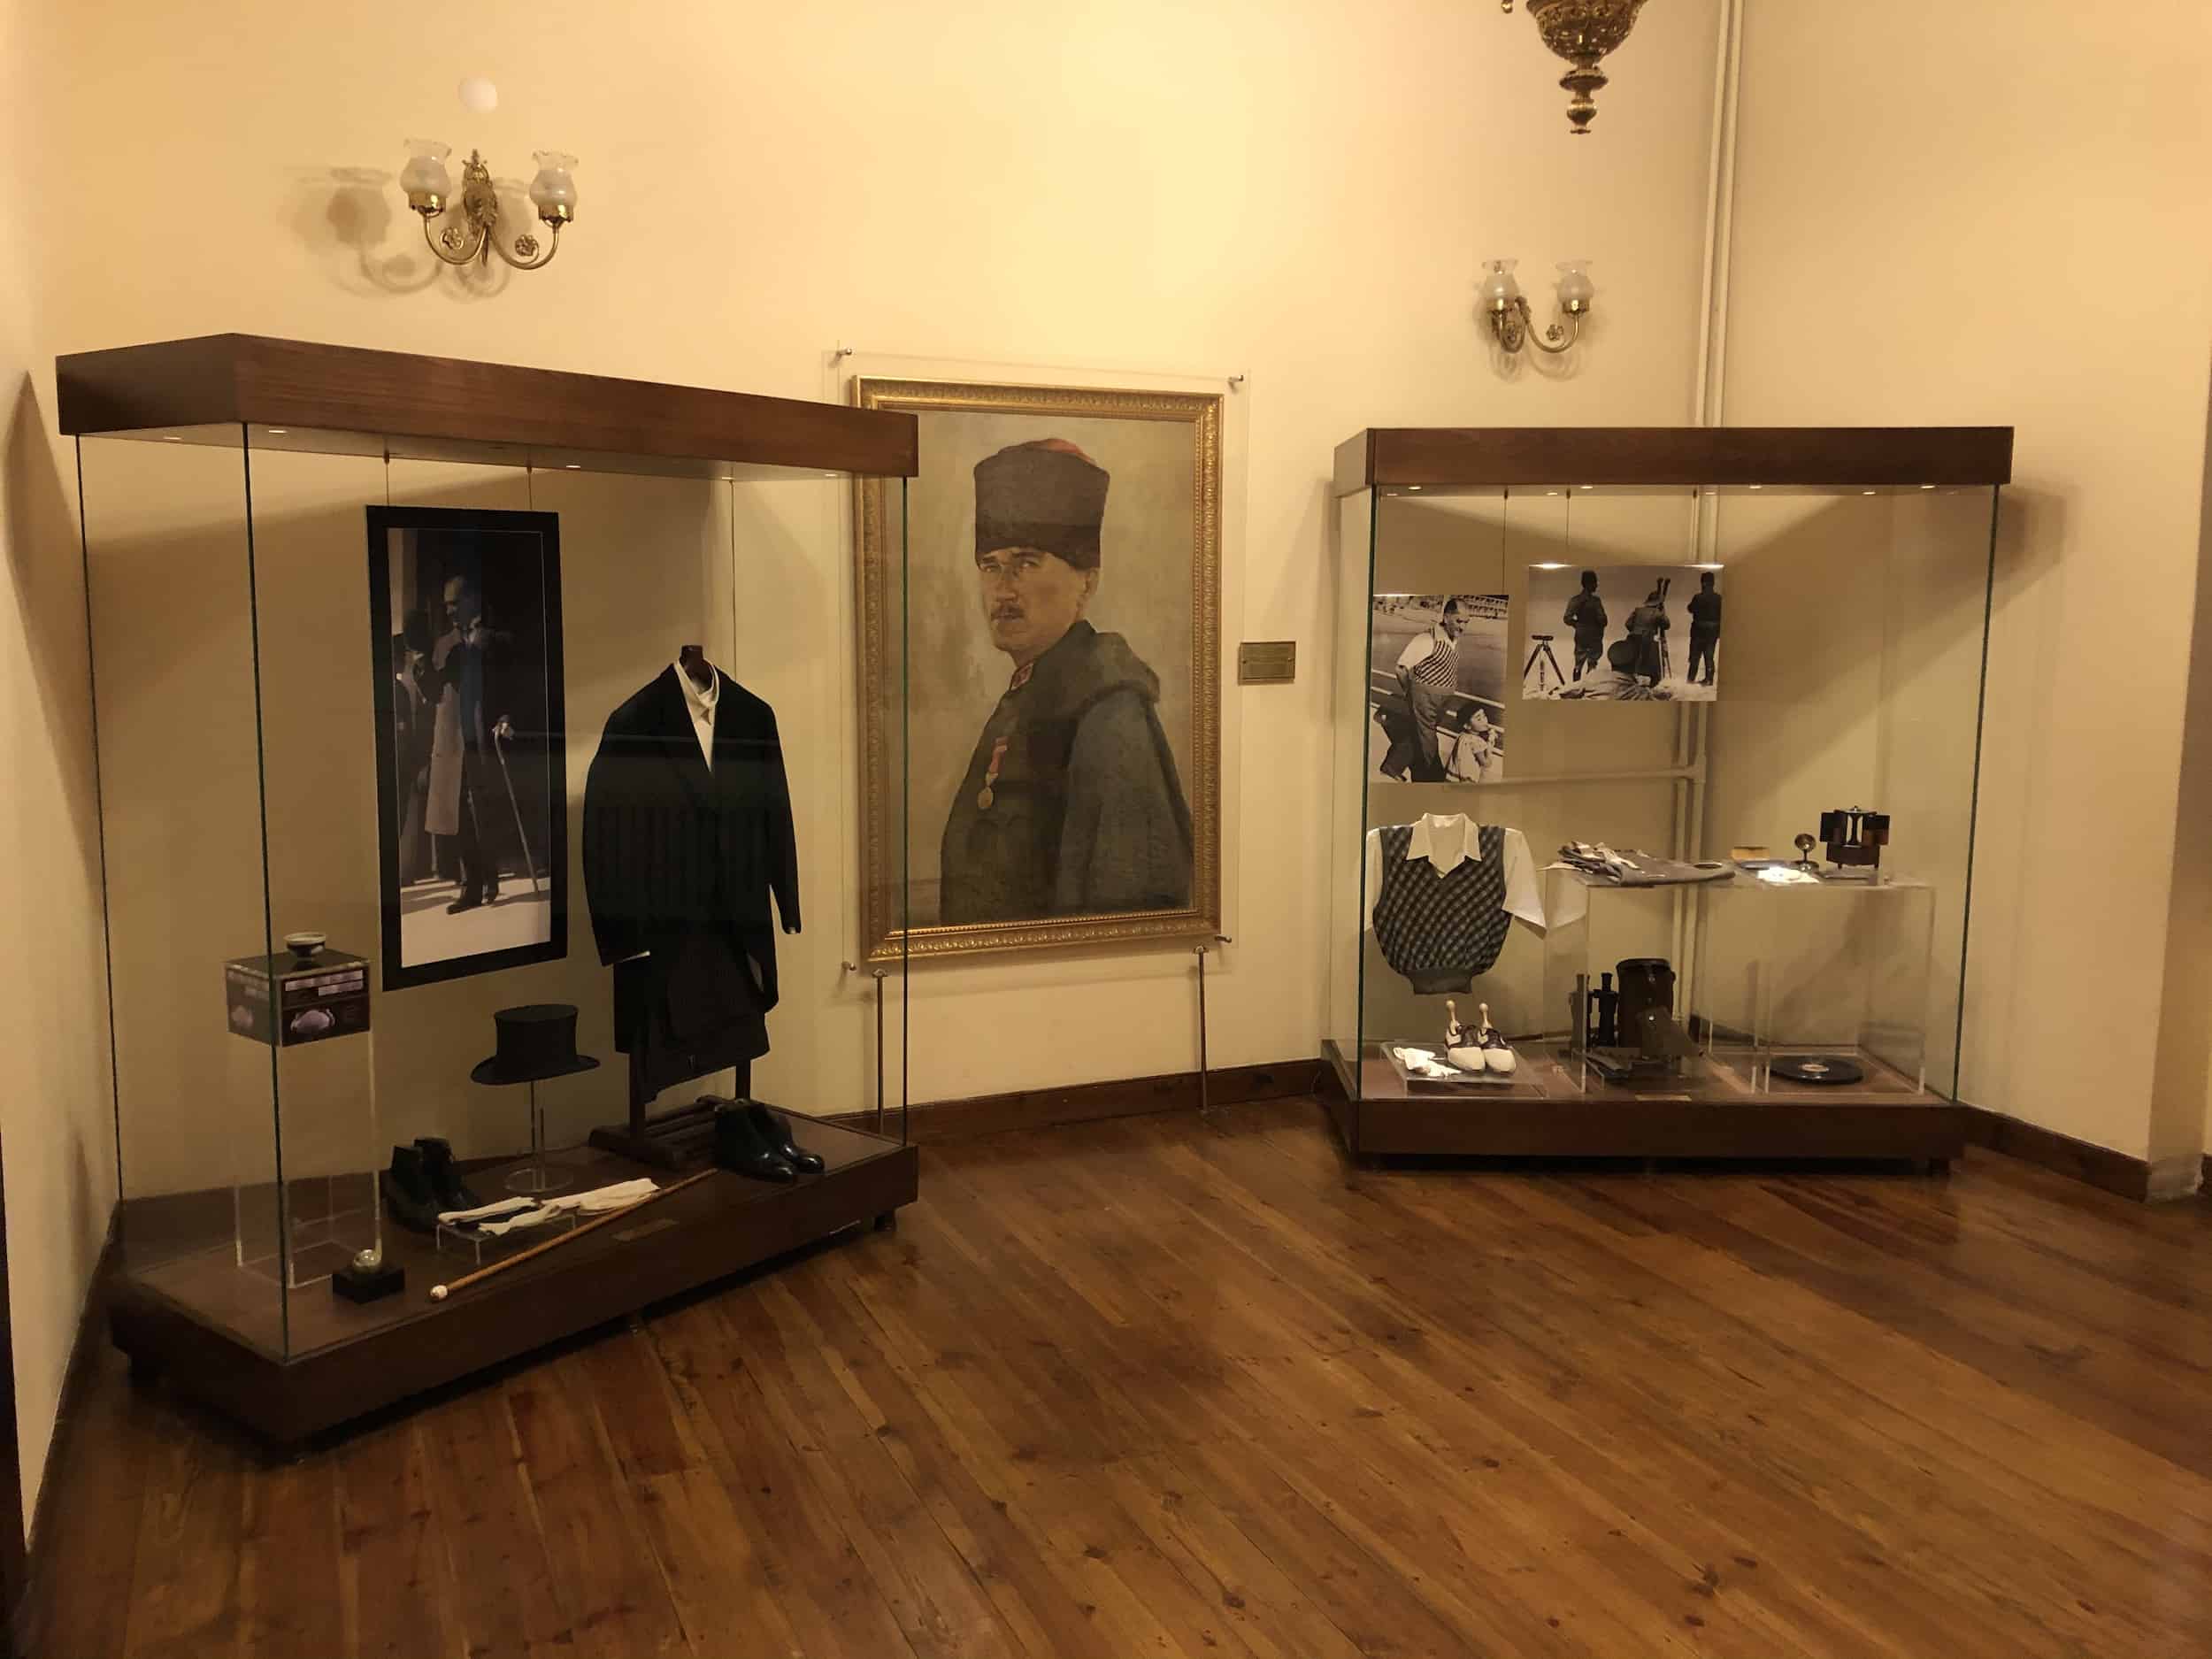 Personal belongings of Atatürk at the Republic Museum at the Second Grand National Assembly of Turkey in Ulus, Ankara, Turkey